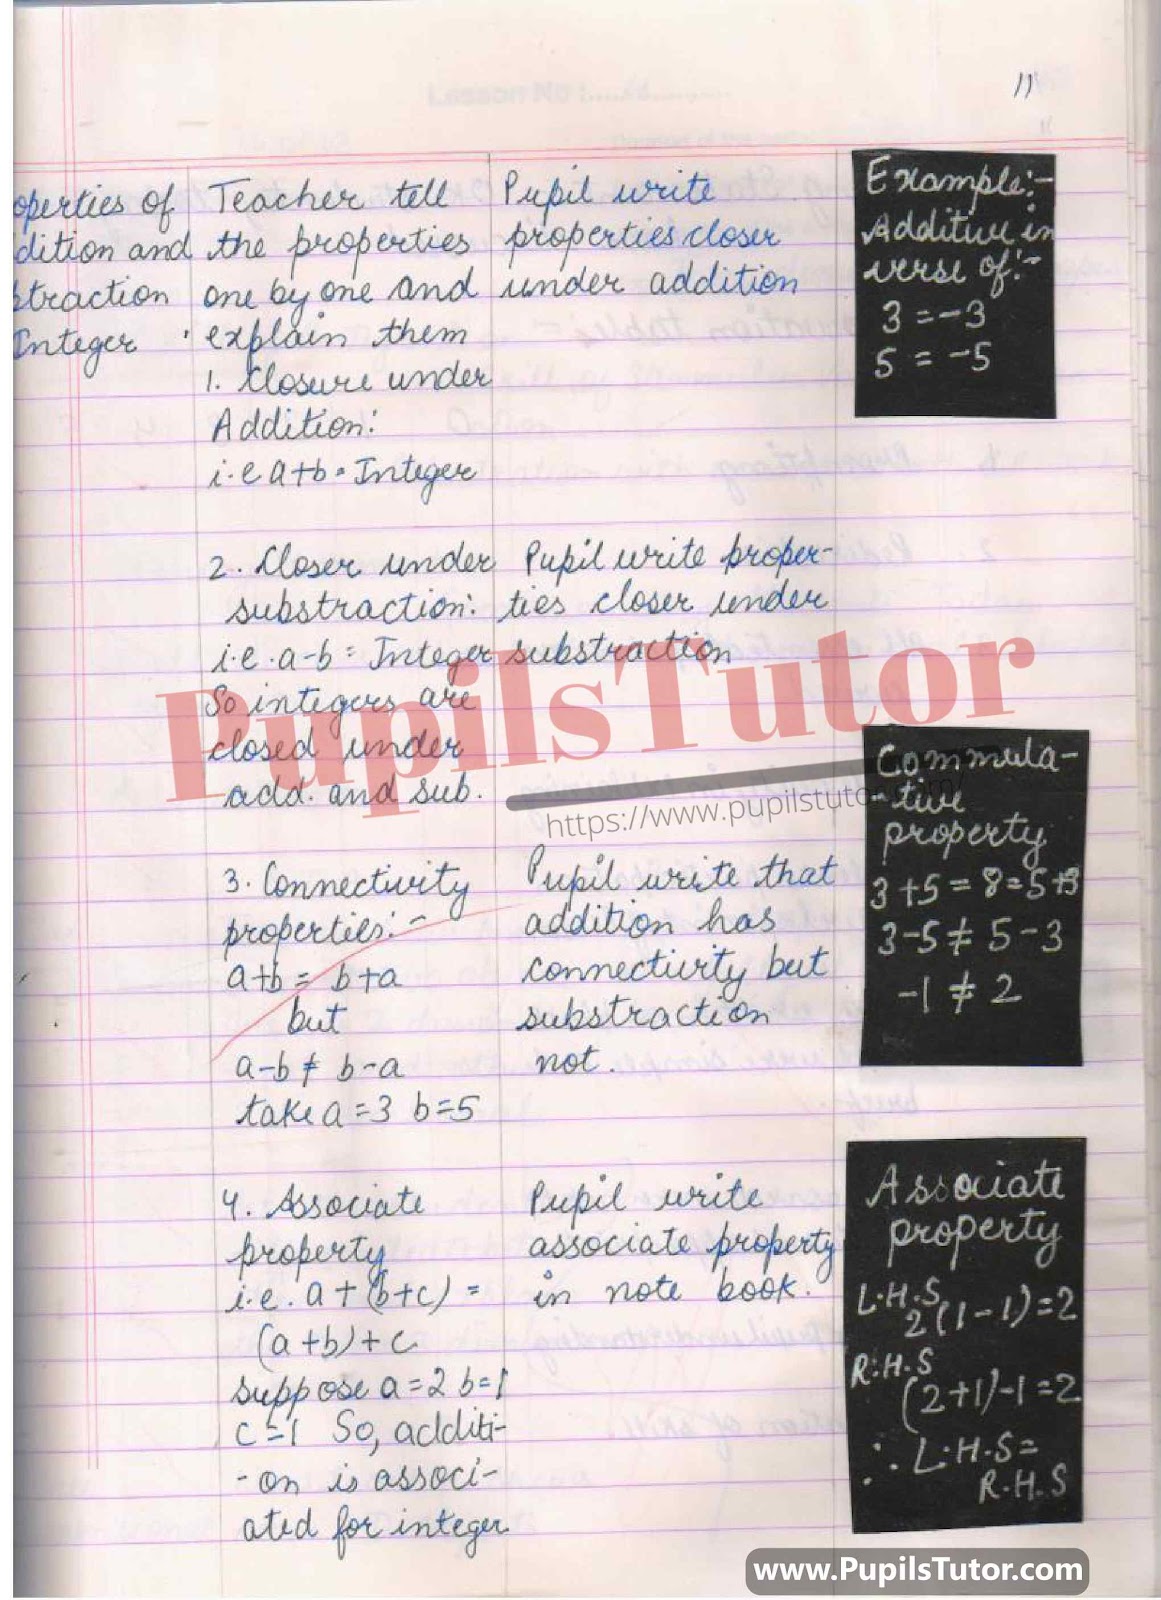 Math Lesson Plan On Integers For Class/Grade 7 For CBSE NCERT School And College Teachers  – (Page And Image Number 3) – www.pupilstutor.com